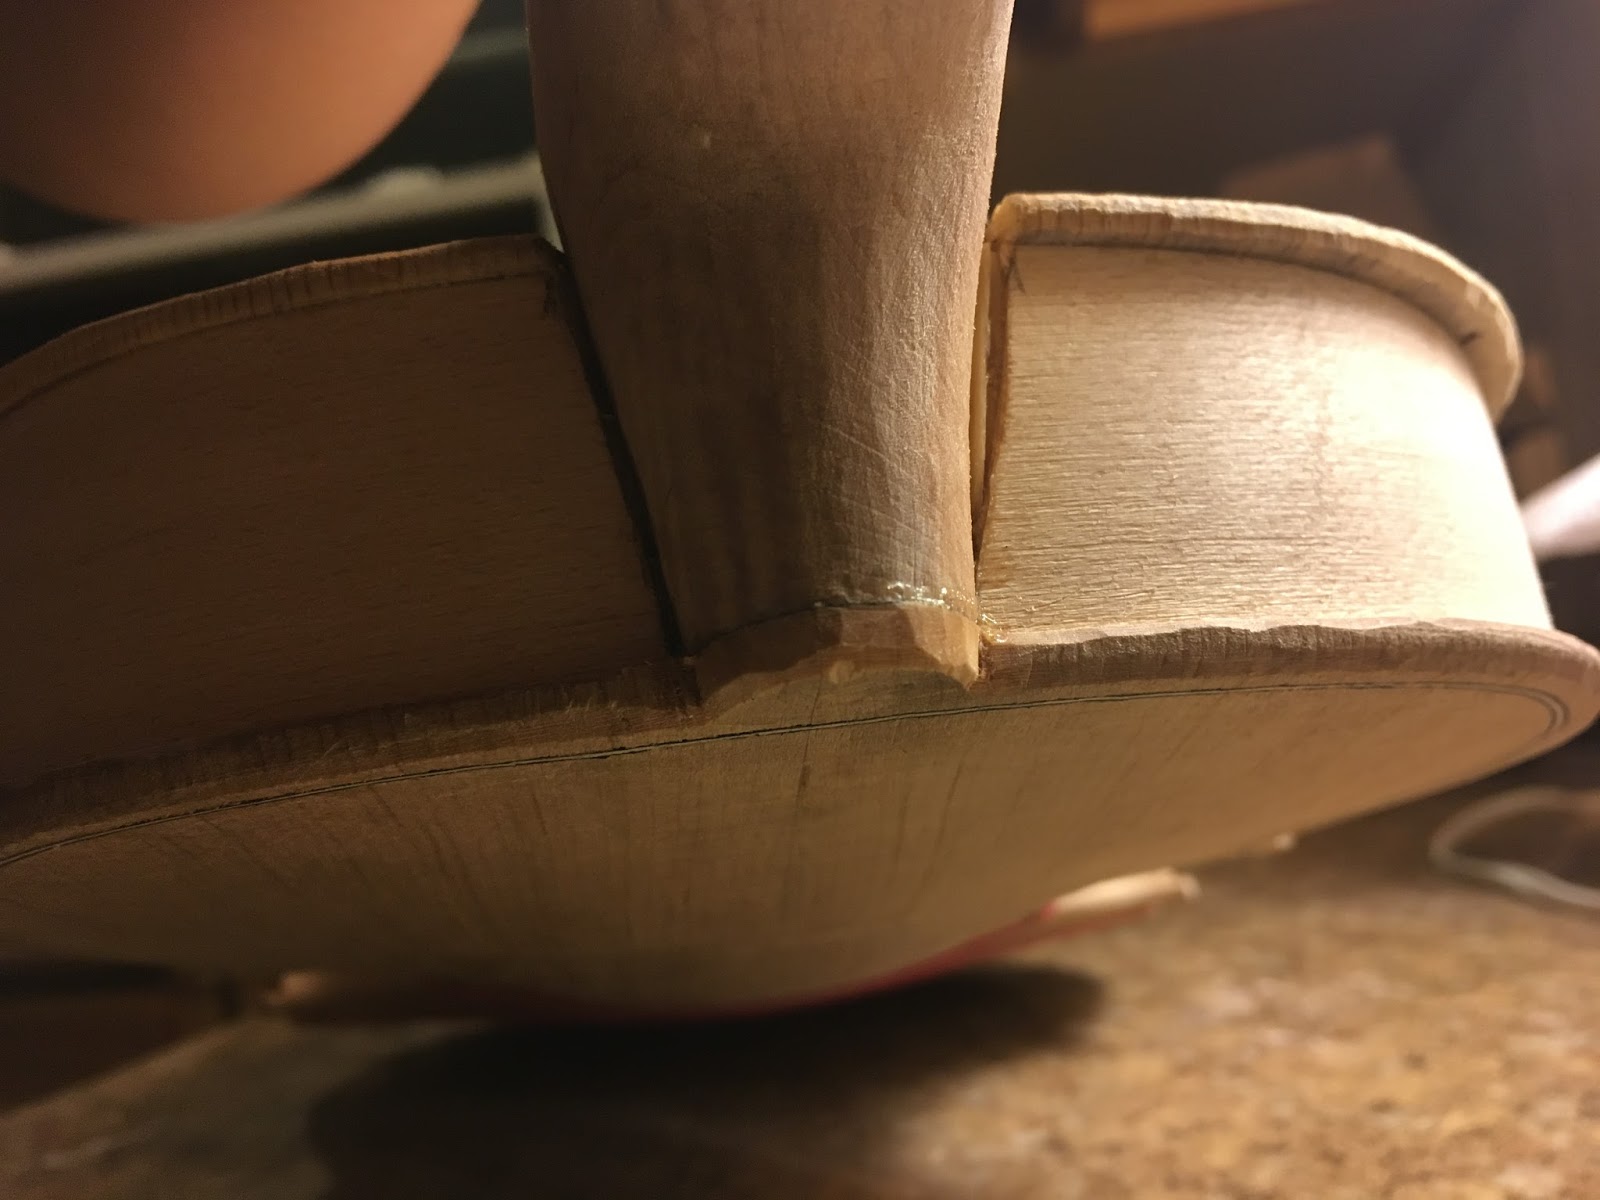 The DIY Violin: Setting the neck